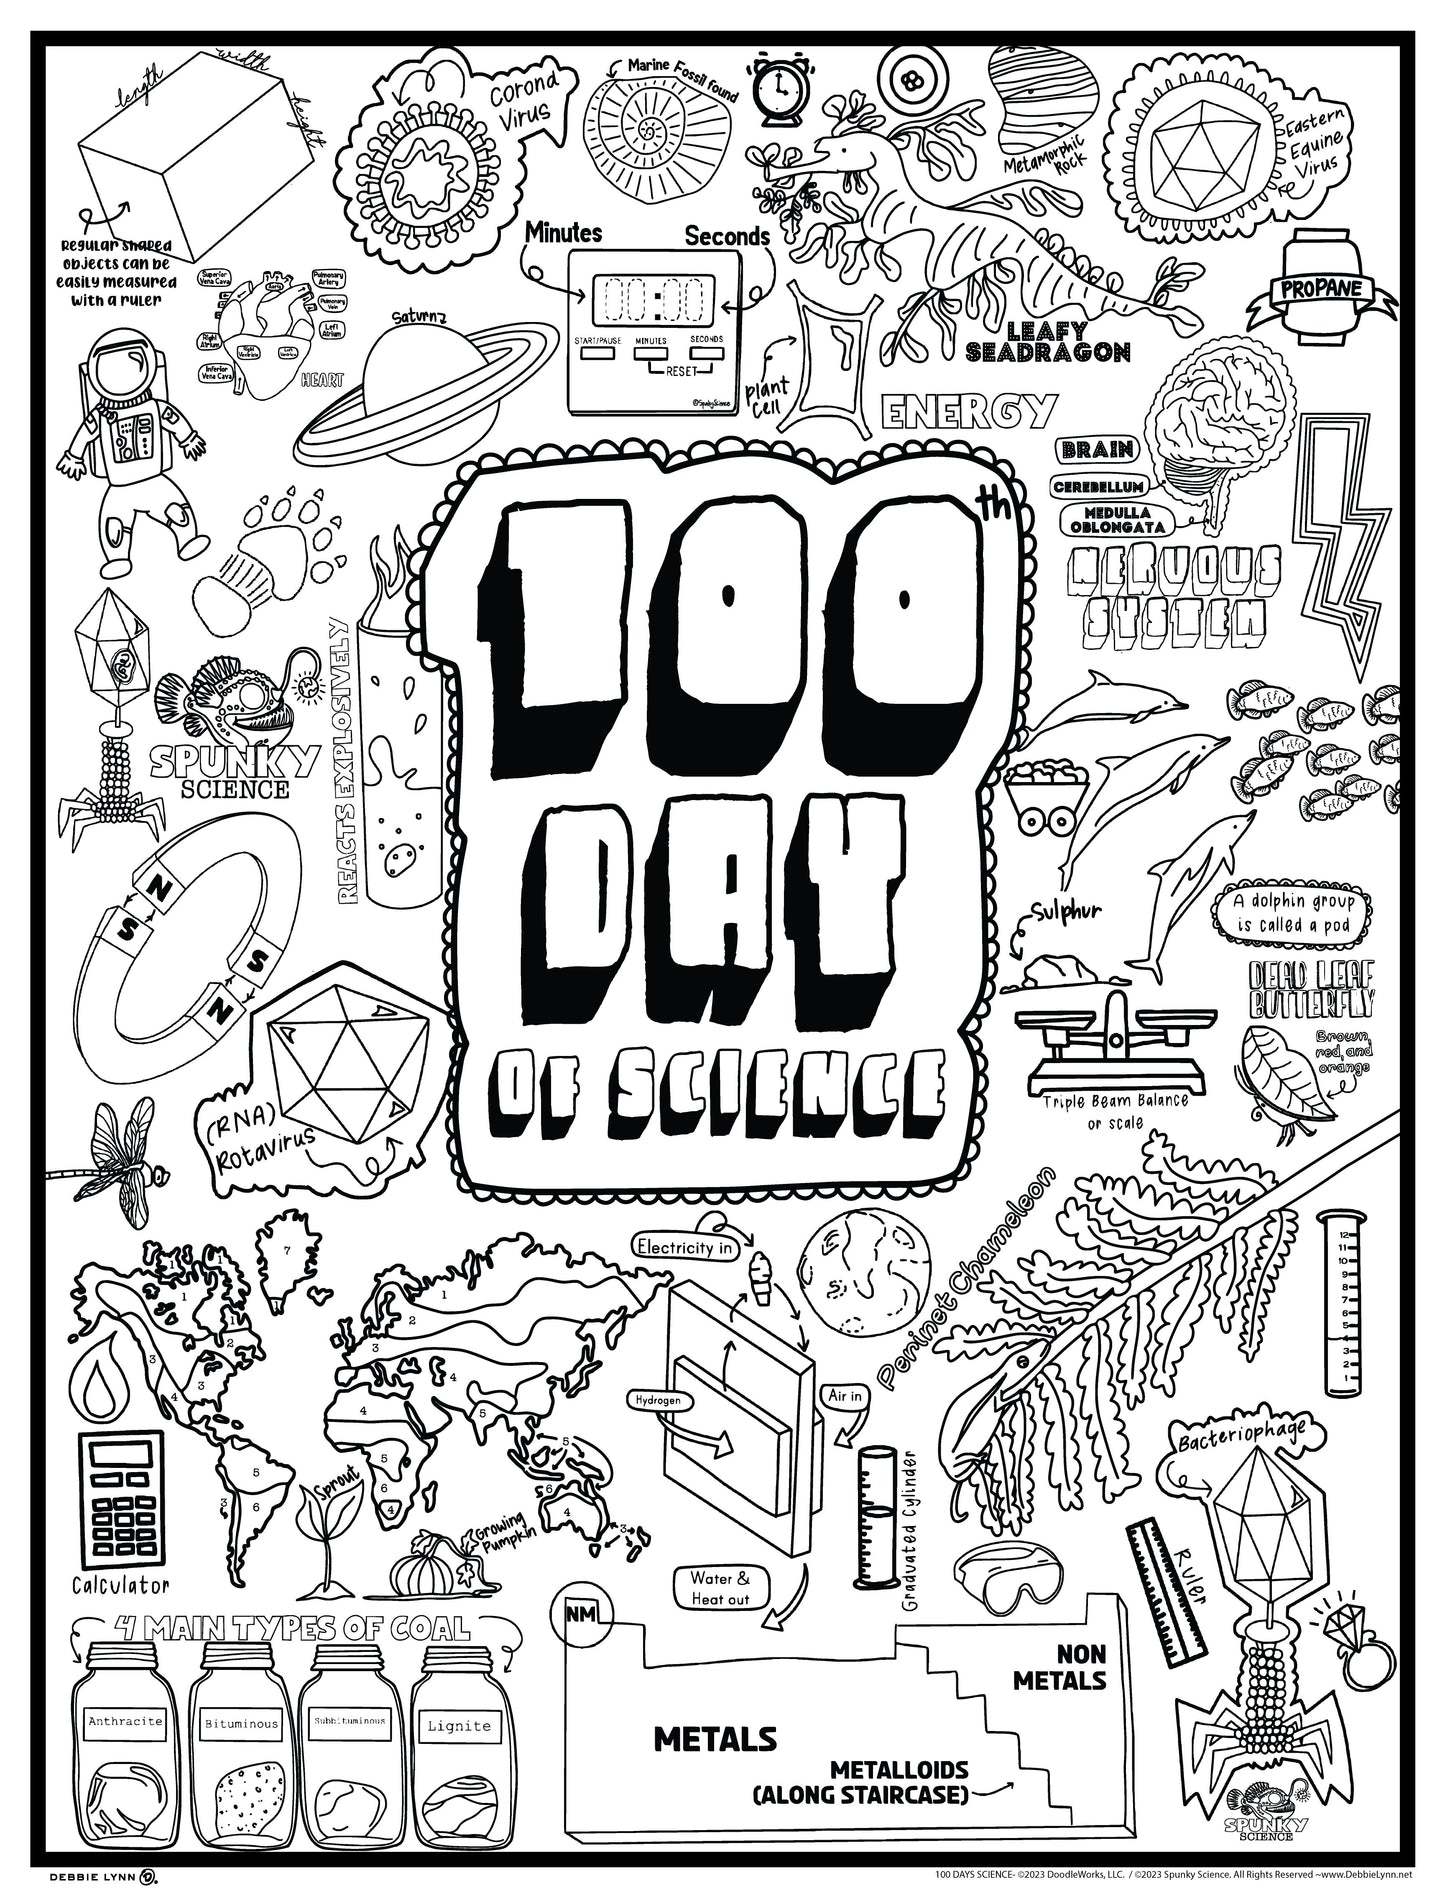 100 Days of Science Spunky Science Personalized Giant Coloring Poster 46"x60"